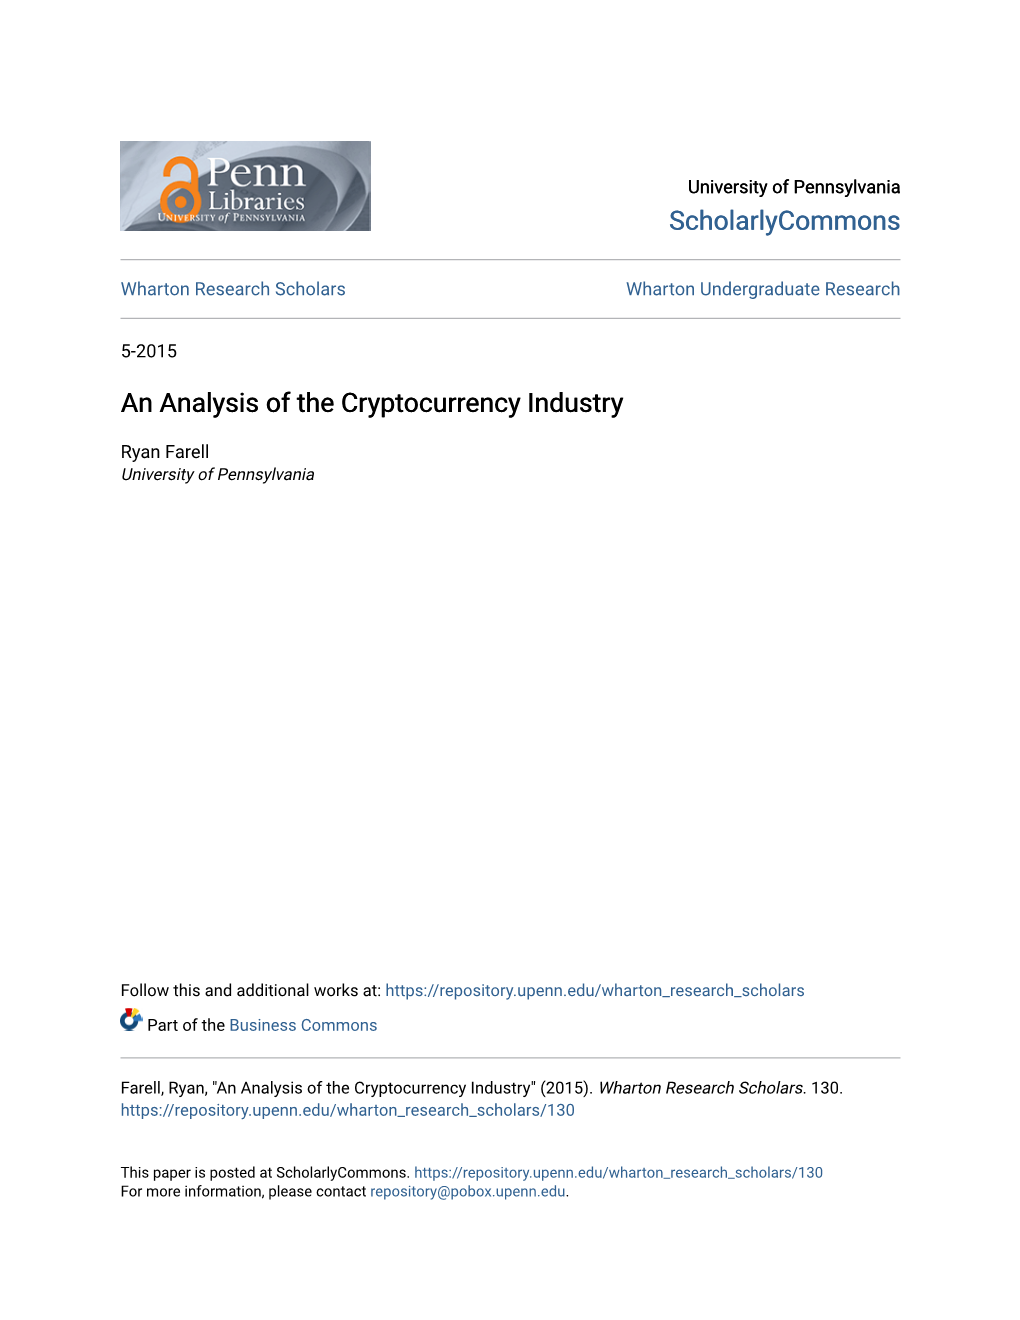 An Analysis of the Cryptocurrency Industry